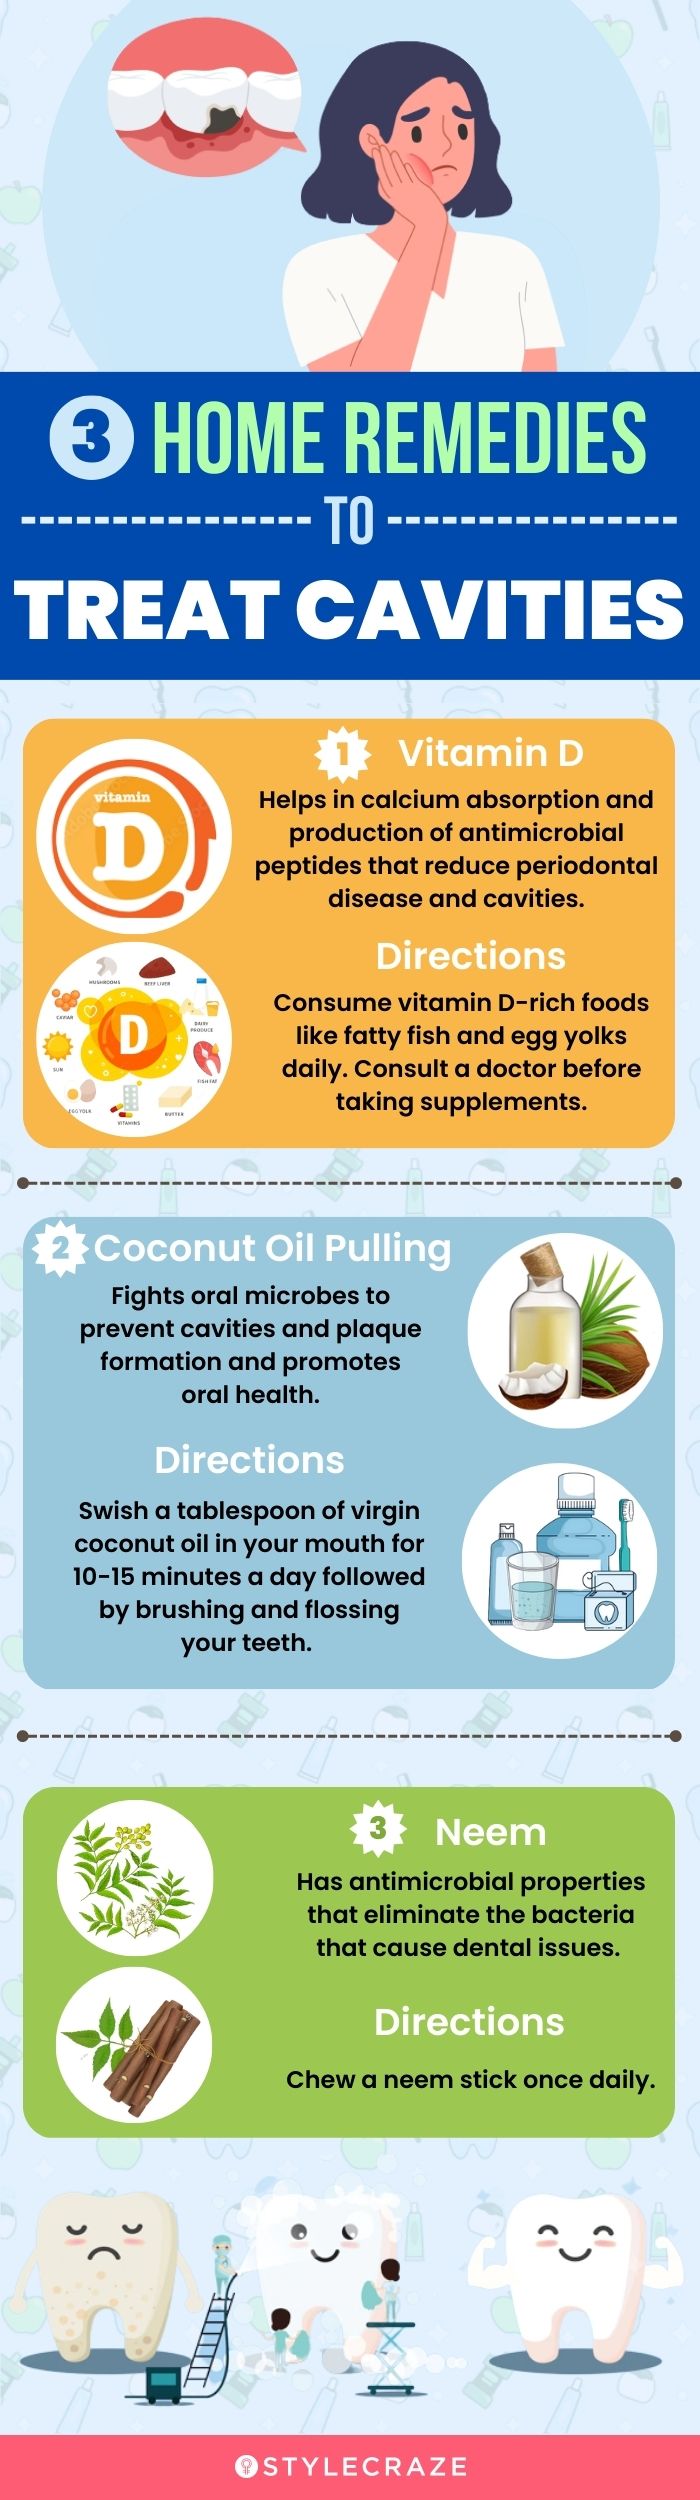 3 home remedies to treat cavities (infographic)